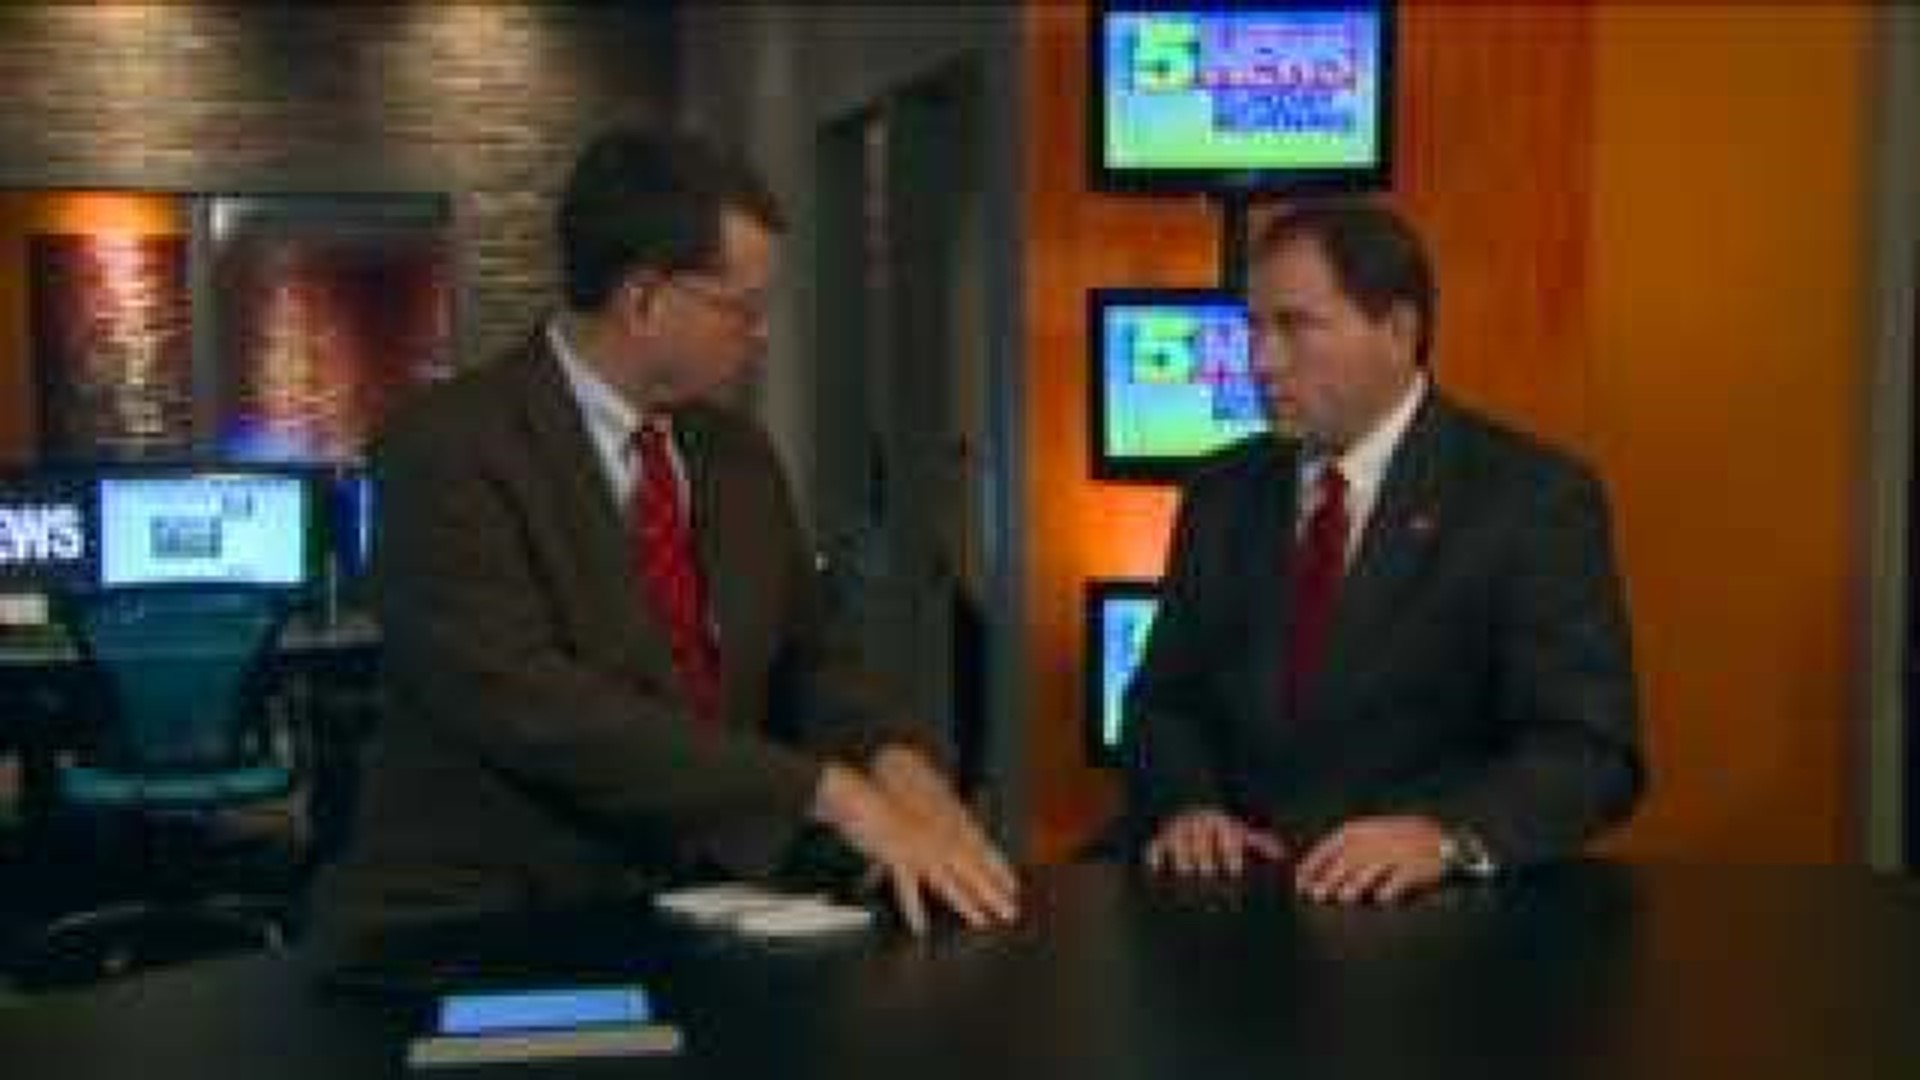 Discussing Attorney General Race